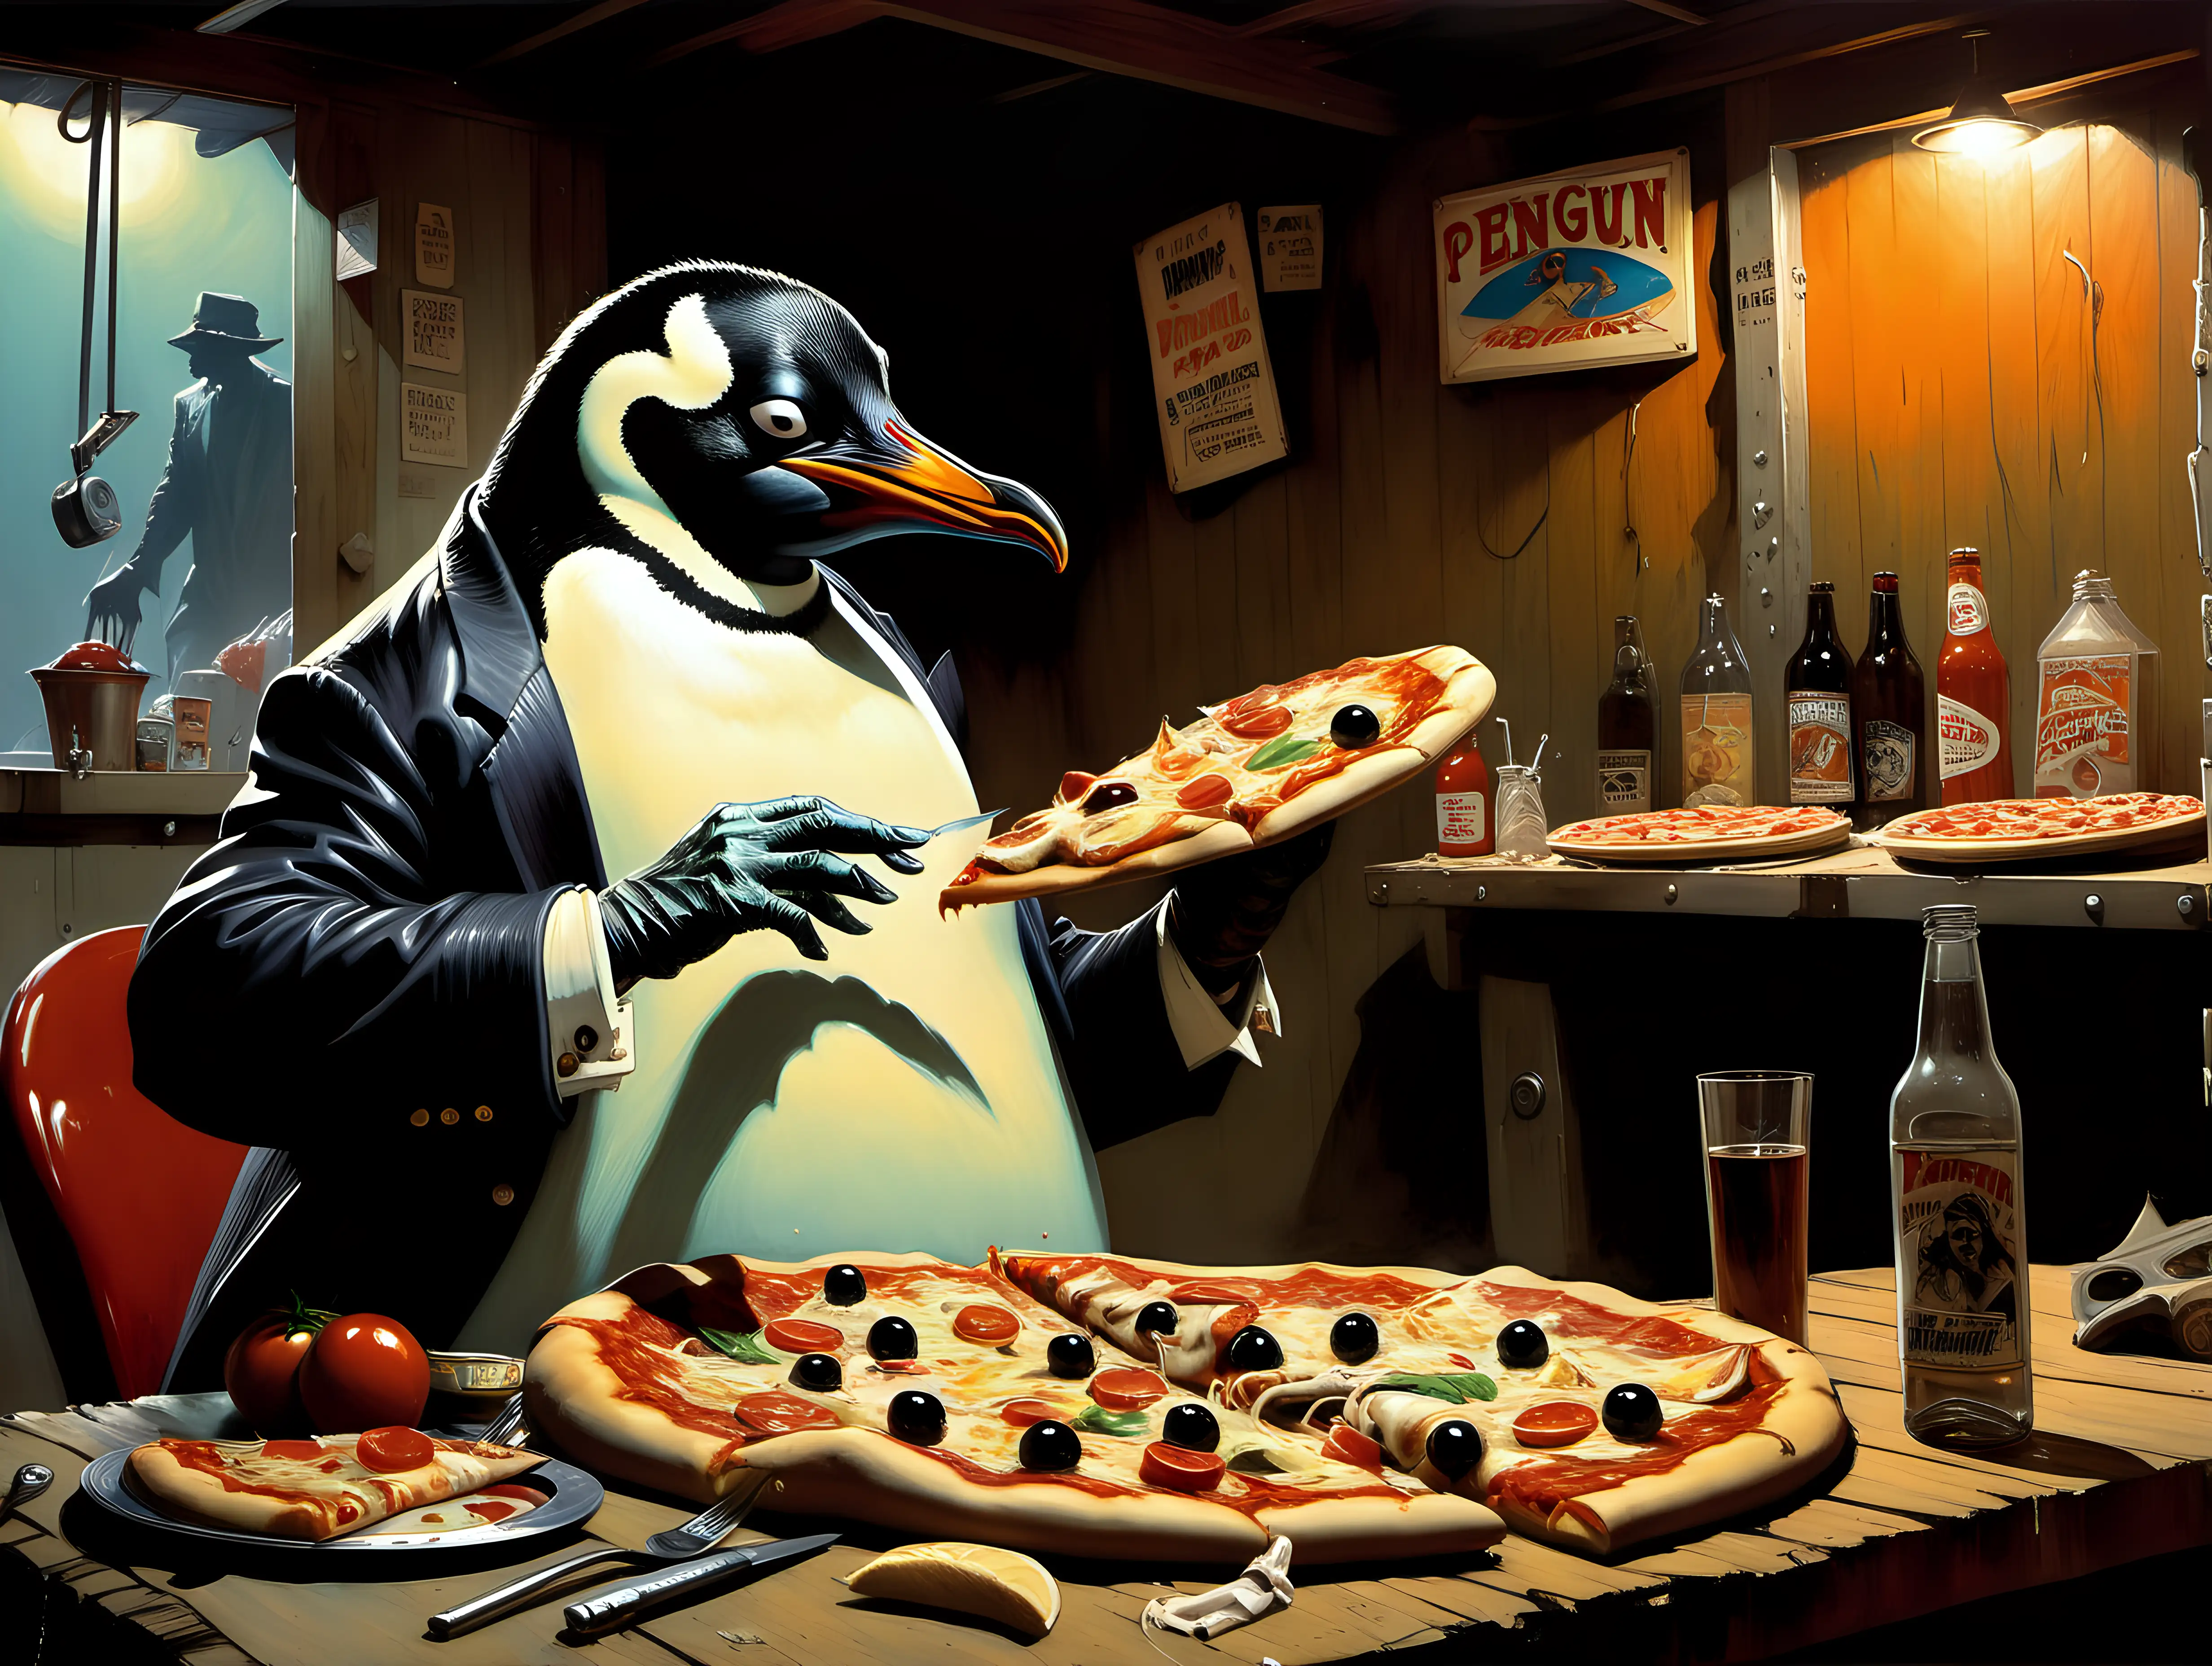 The Penquin eating pizza in a juke joint Frank Frazetta style painting